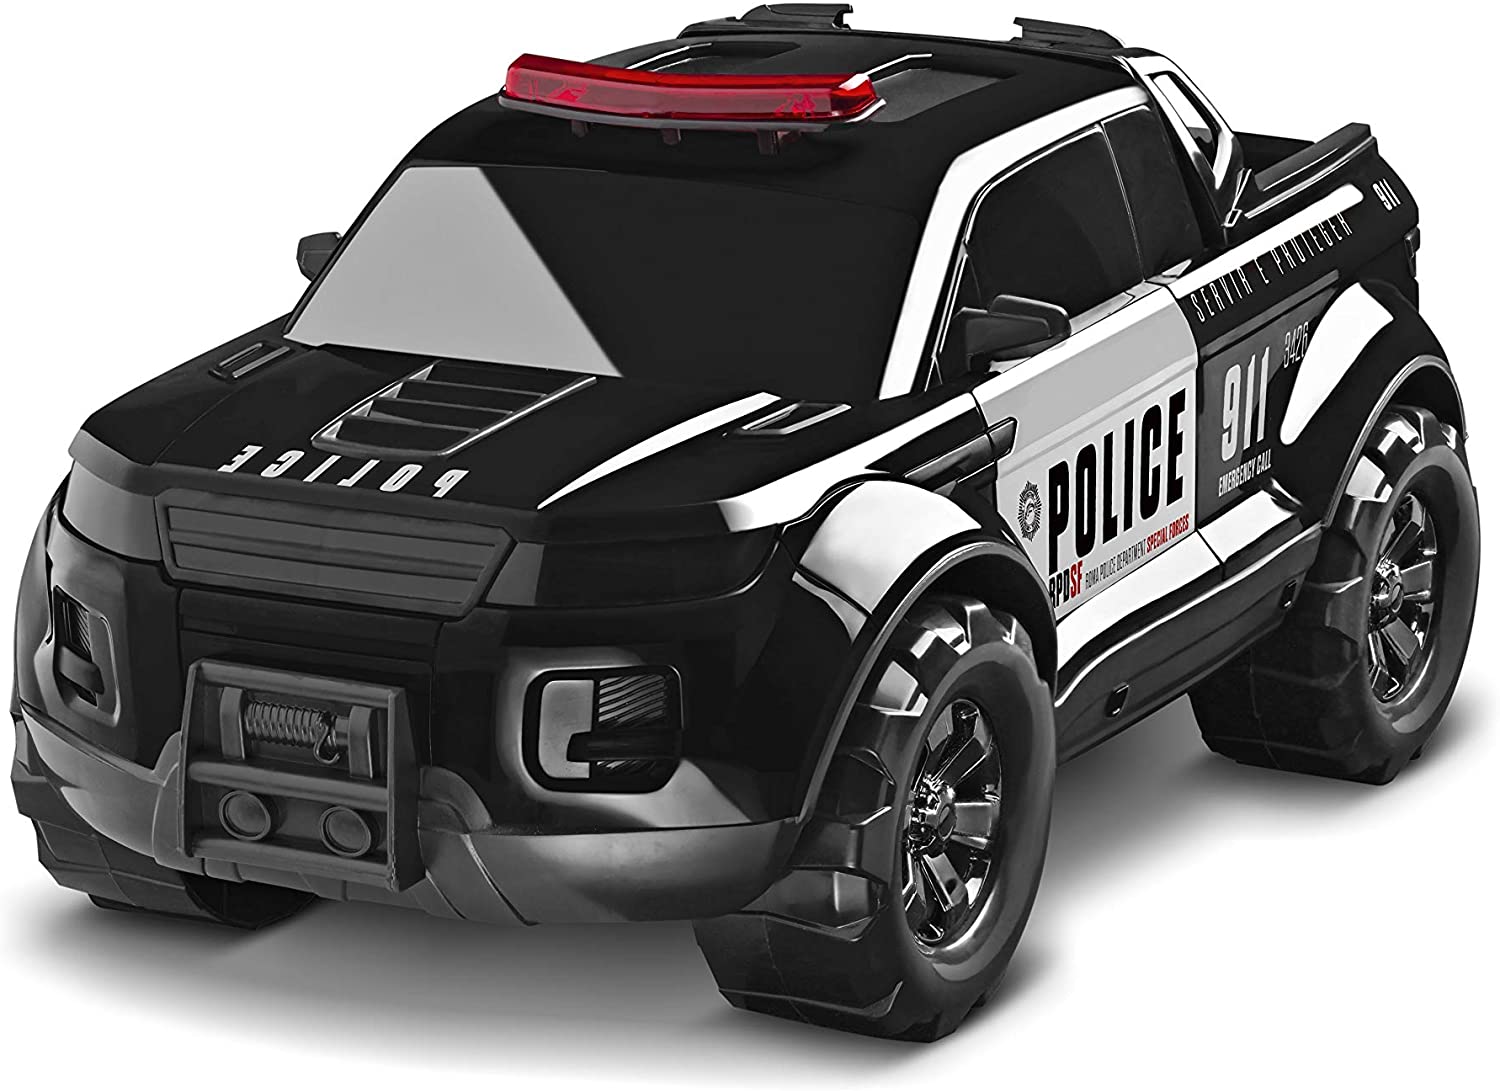 7896965209915 - BRINQ ROMA PICK-UP FORCE POLICE 0991